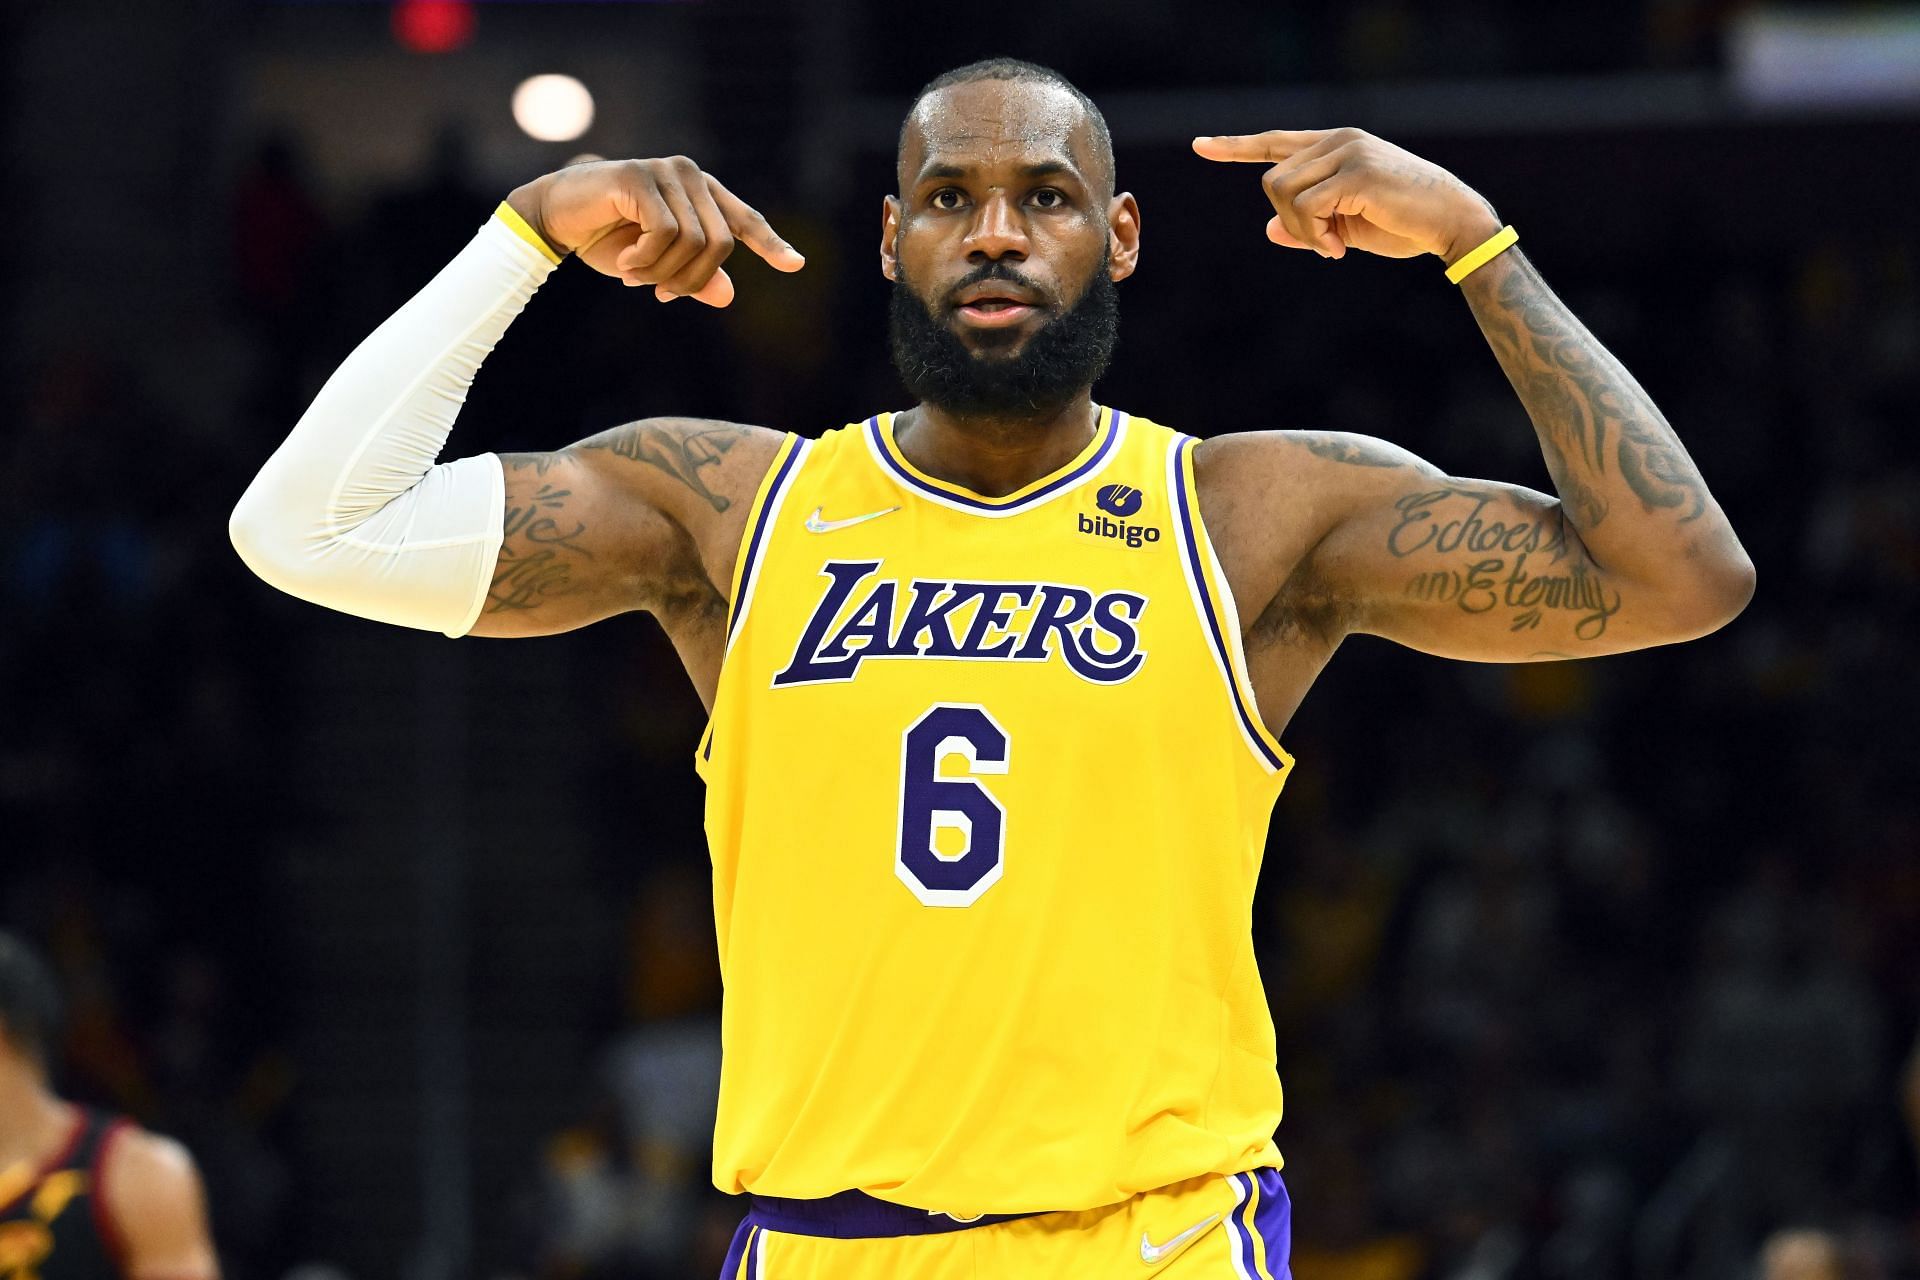 LeBron James of the LA Lakers celebrates during the fourth quarter against the Cleveland Cavaliers on March 21 in Cleveland, Ohio. The Lakers defeated the Cavaliers 131-120.